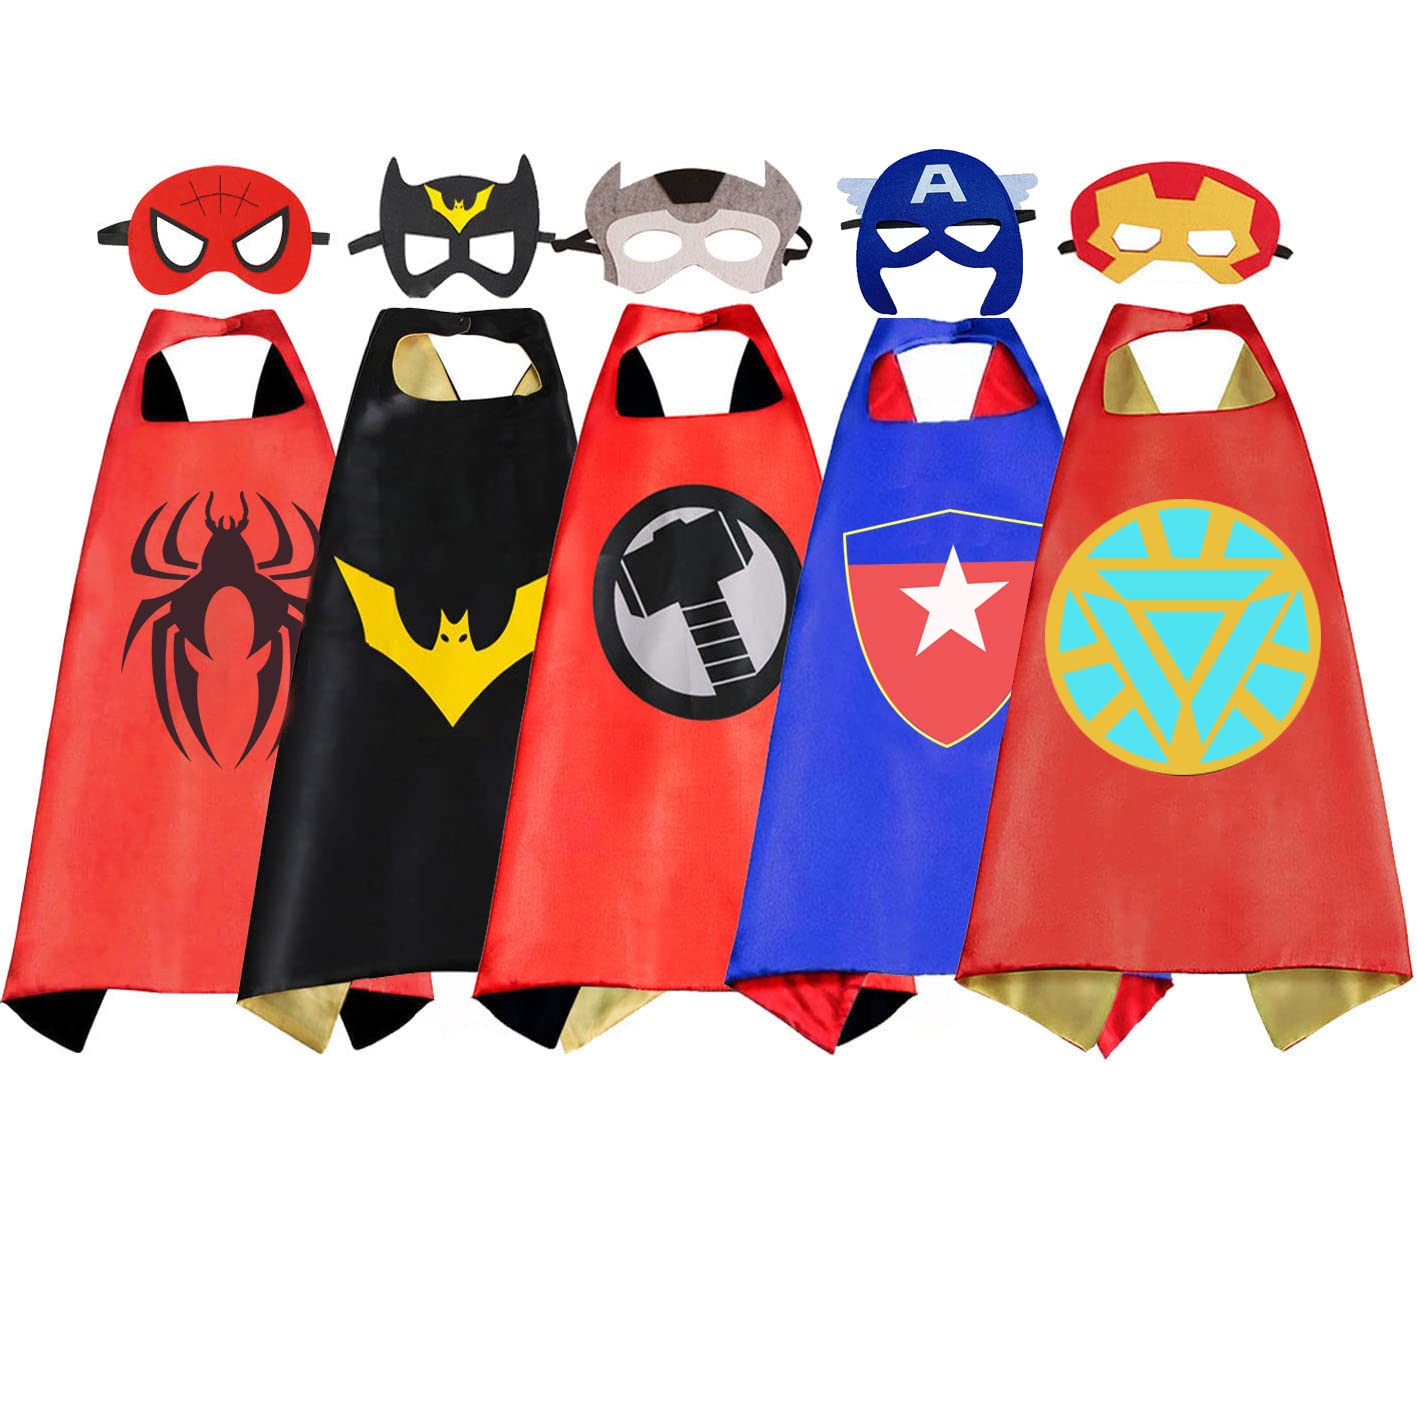 RioRand Kids Superhero Capes Set Toys for 3-10 Year Old Boys Girls Party Supplies Christmas Halloween Gifts